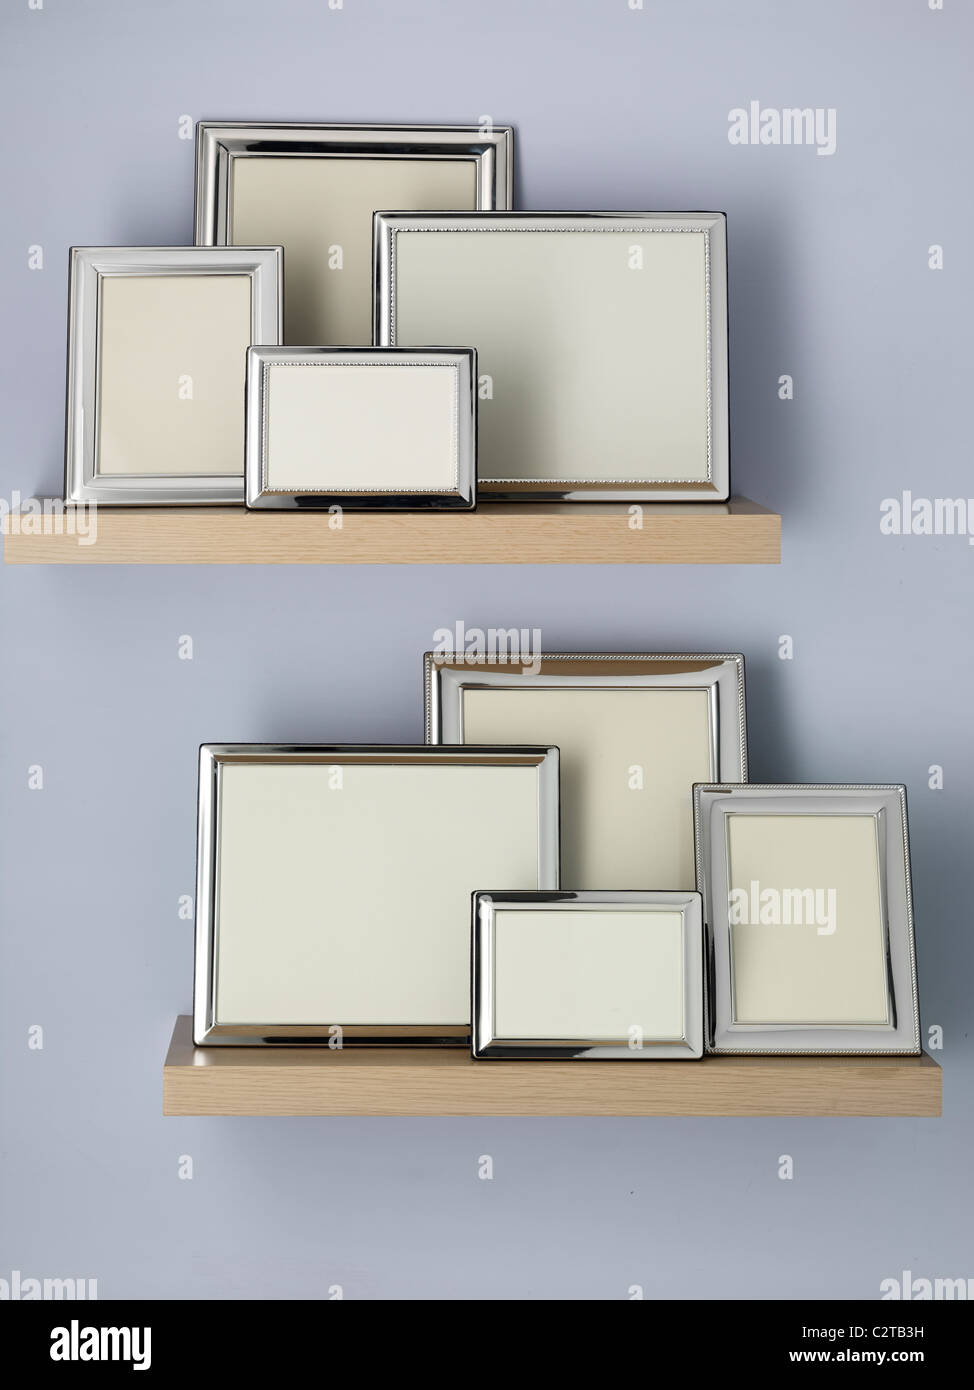 empty picture frames on shelves Stock Photo